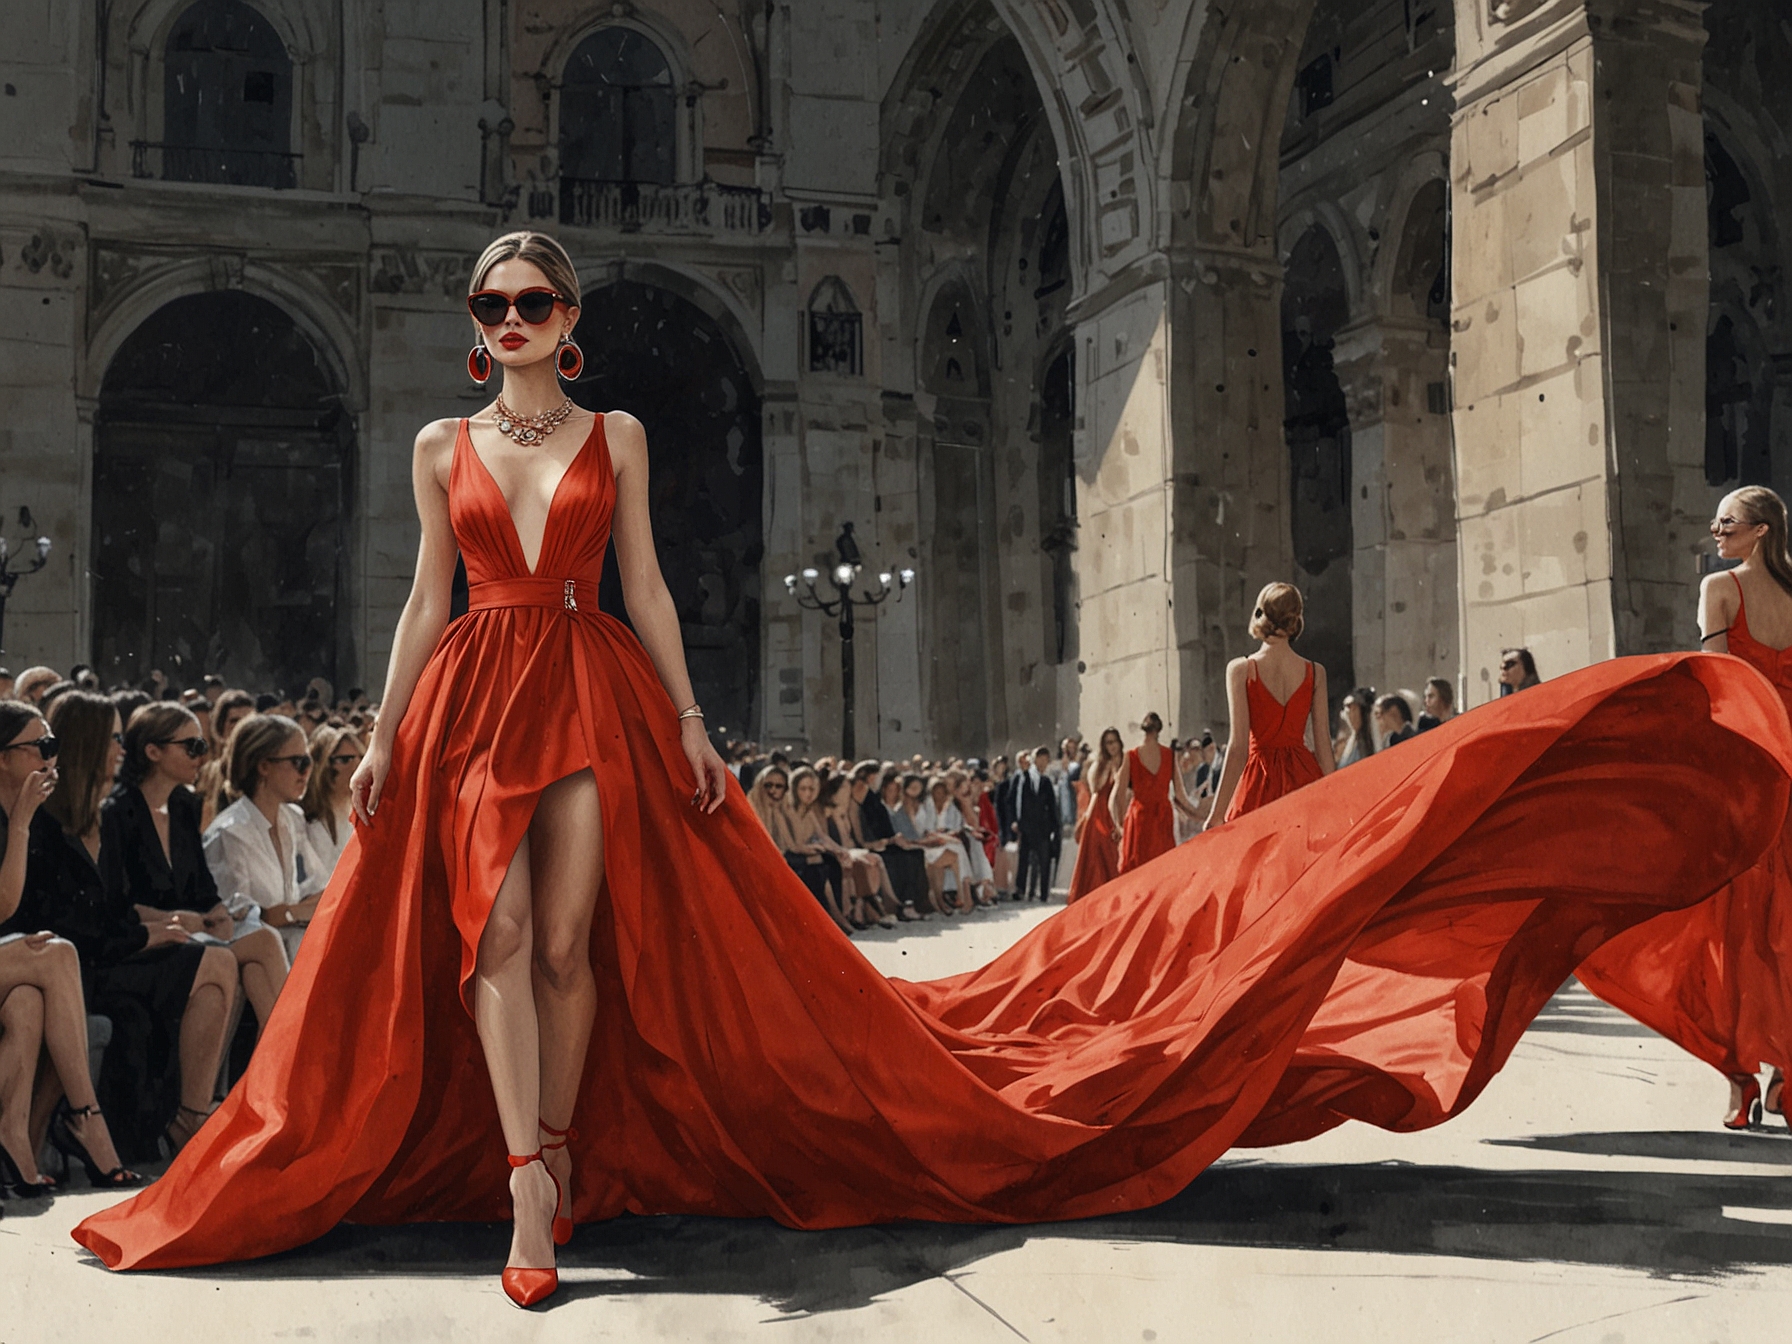 A flowing evening gown in fiery red, accentuated with oversized sunglasses and statement necklaces, captures the audience's attention on the Milan Fashion Week runway.